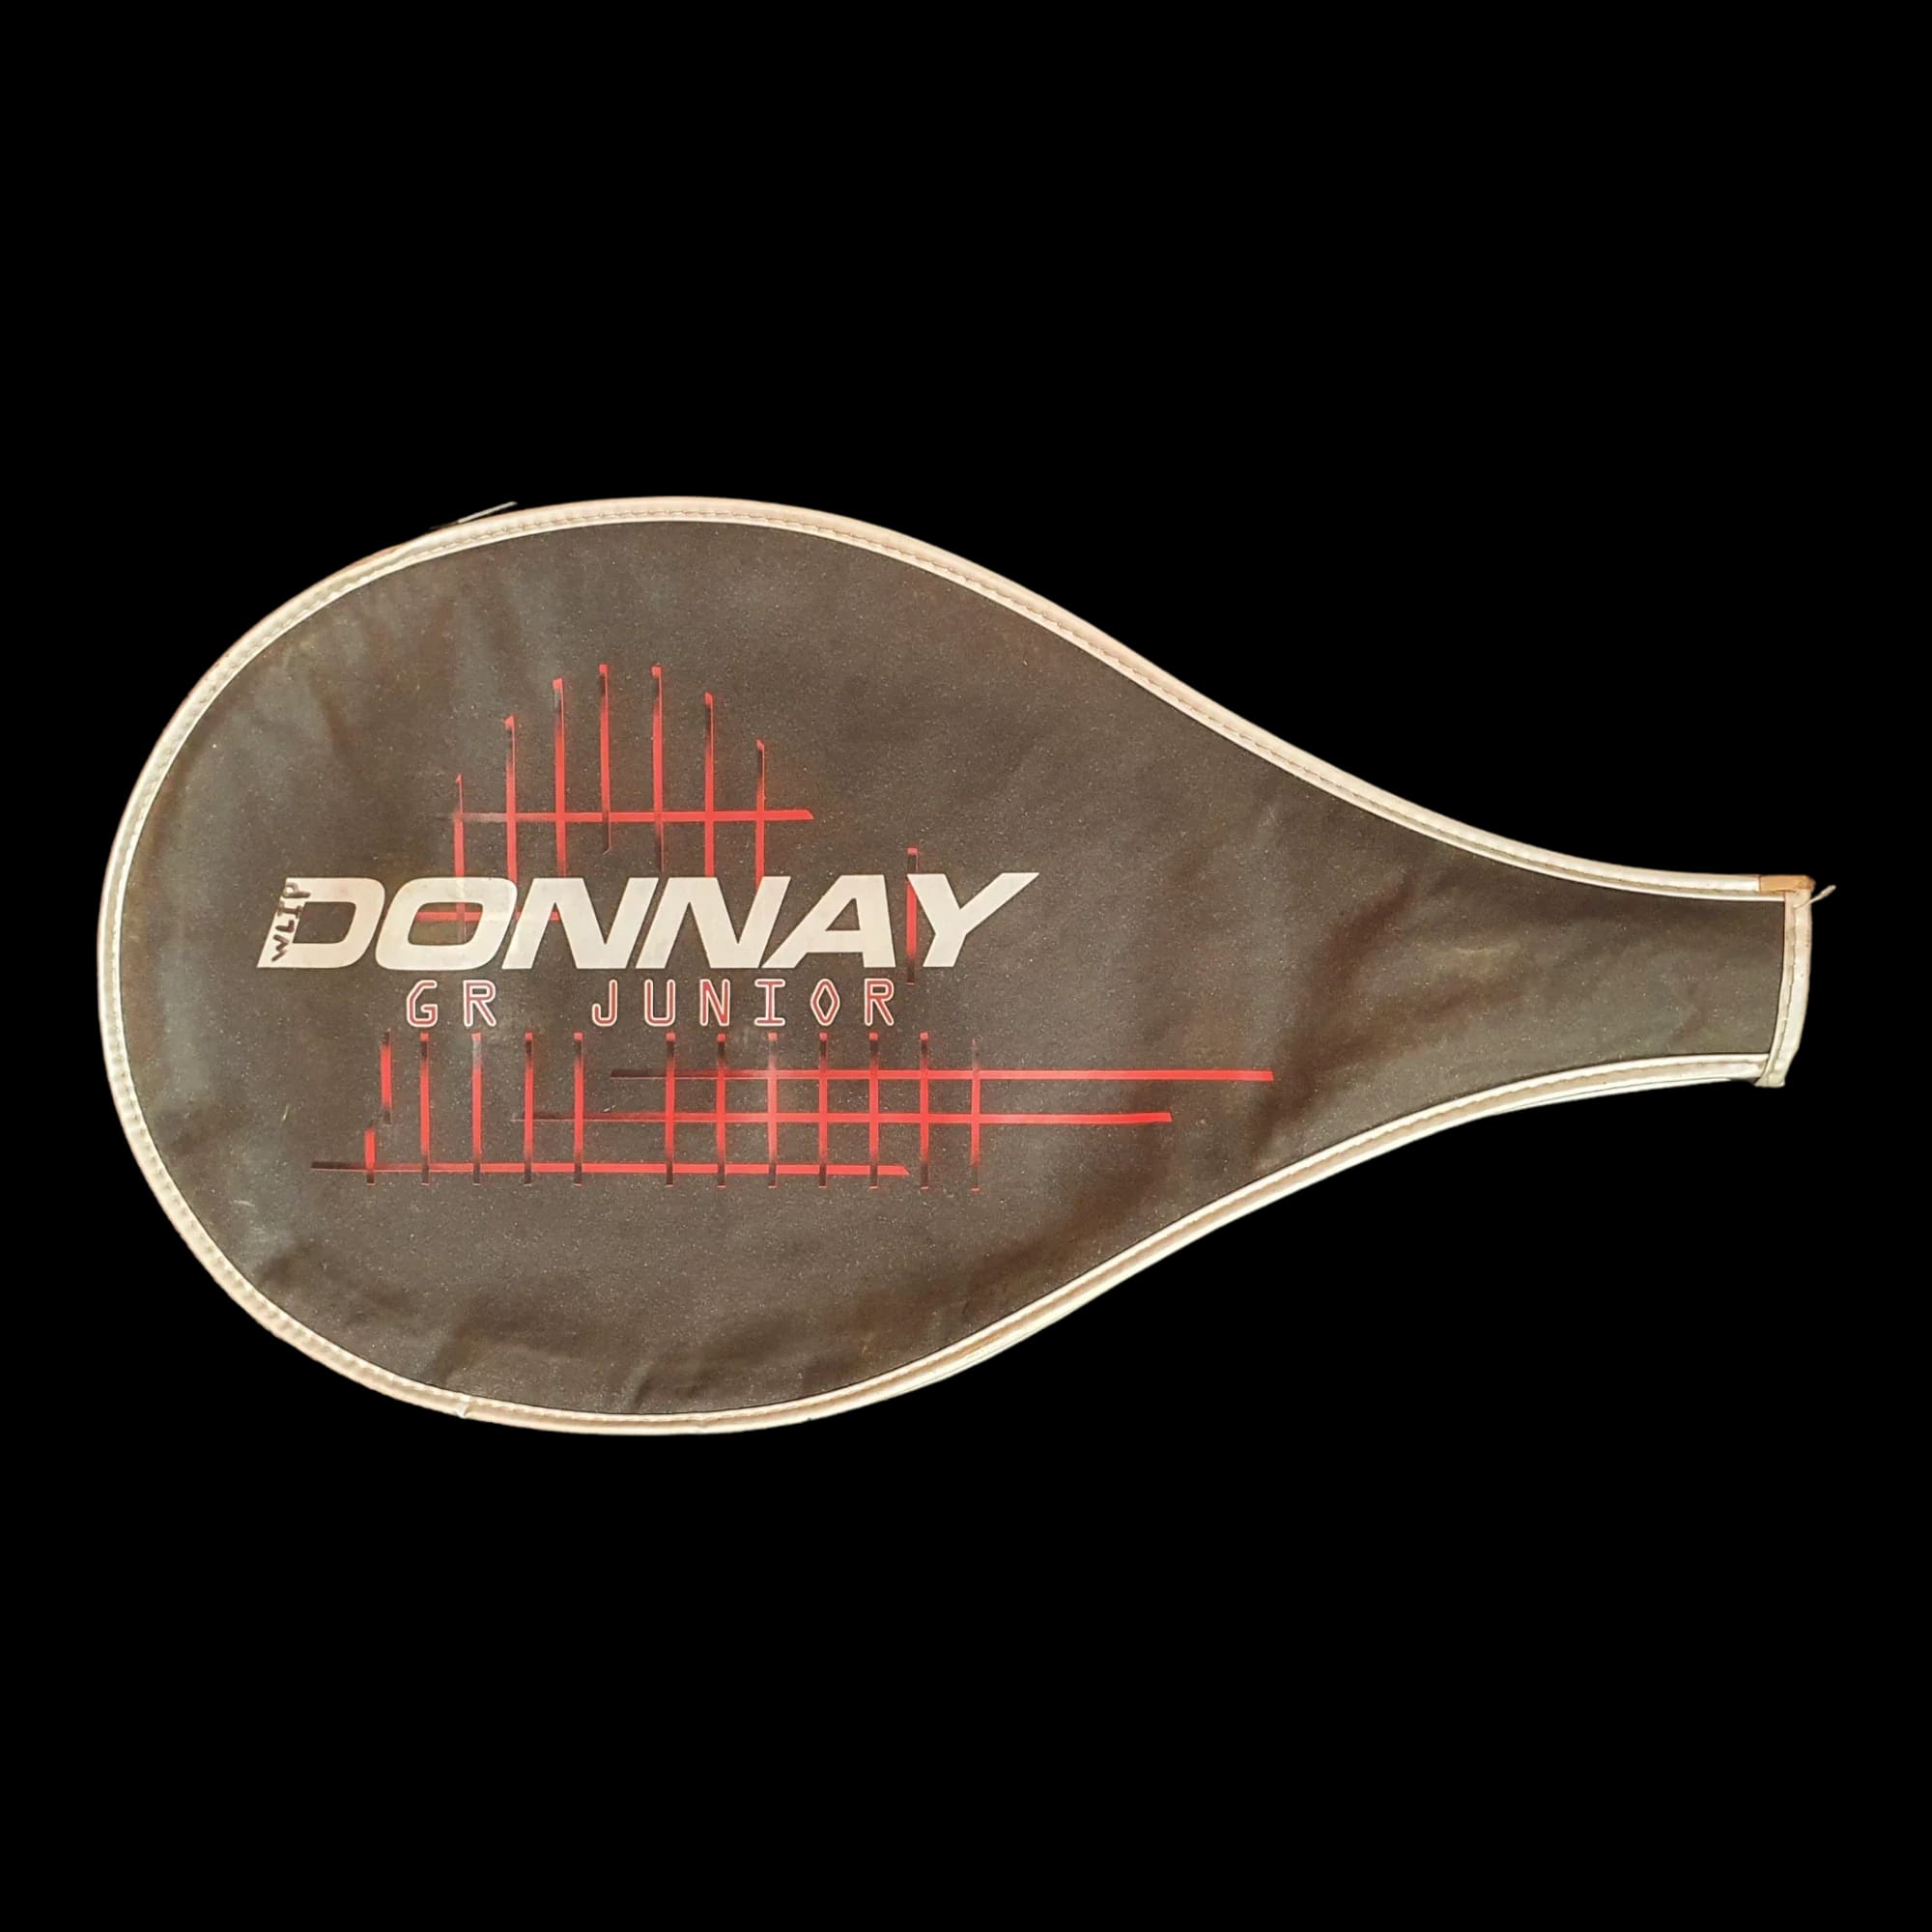 Donnay Gr Junior Tennis Racket With Cover - Rackets - 10